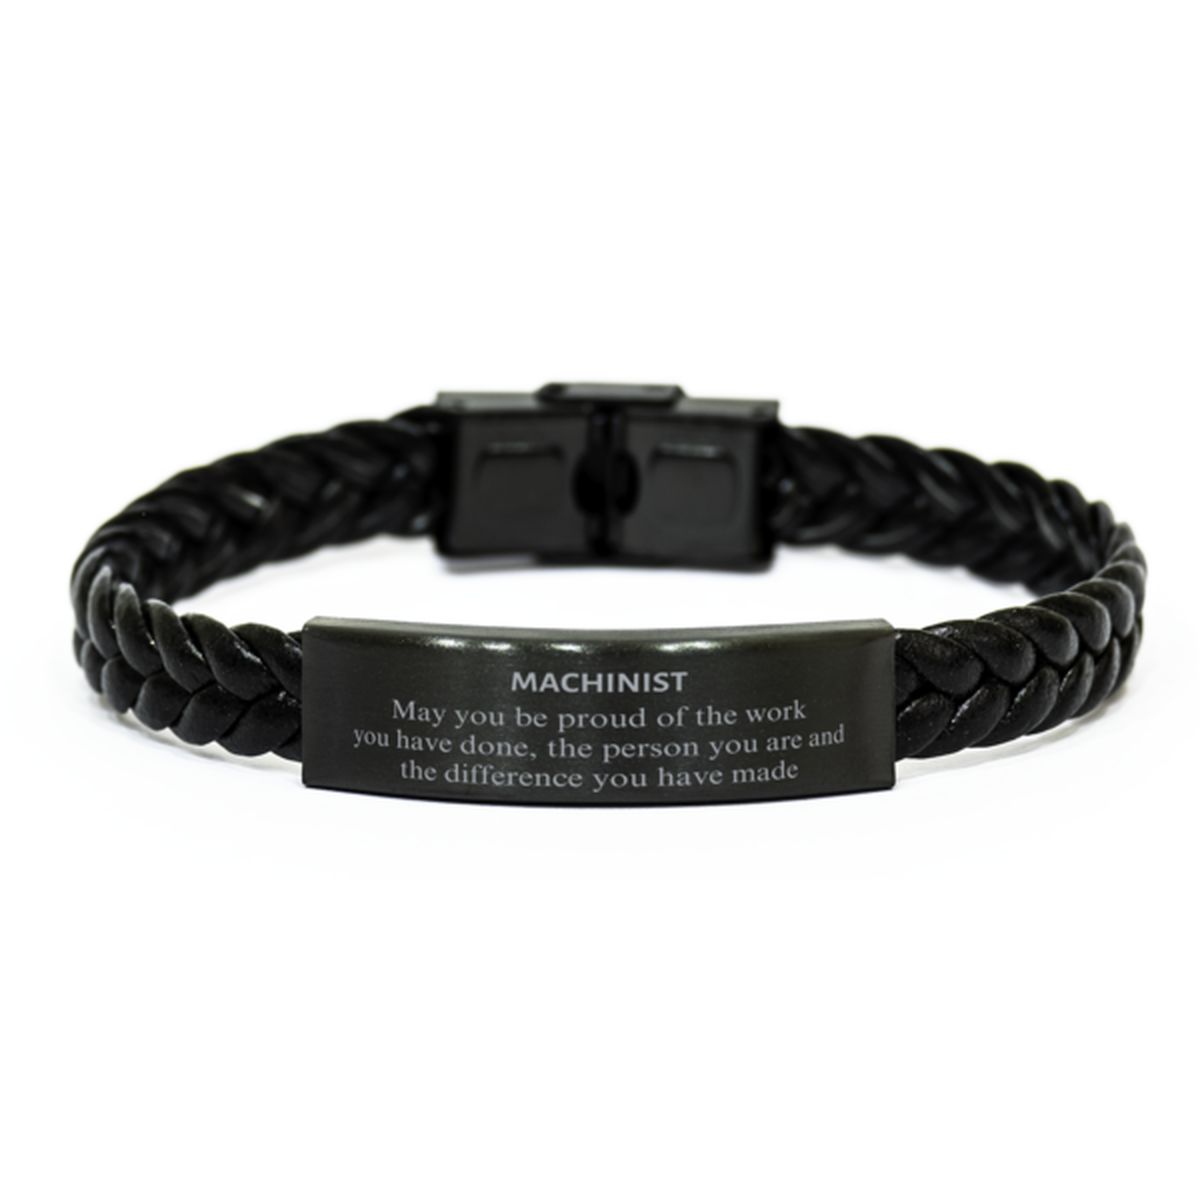 Machinist May you be proud of the work you have done, Retirement Machinist Braided Leather Bracelet for Colleague Appreciation Gifts Amazing for Machinist